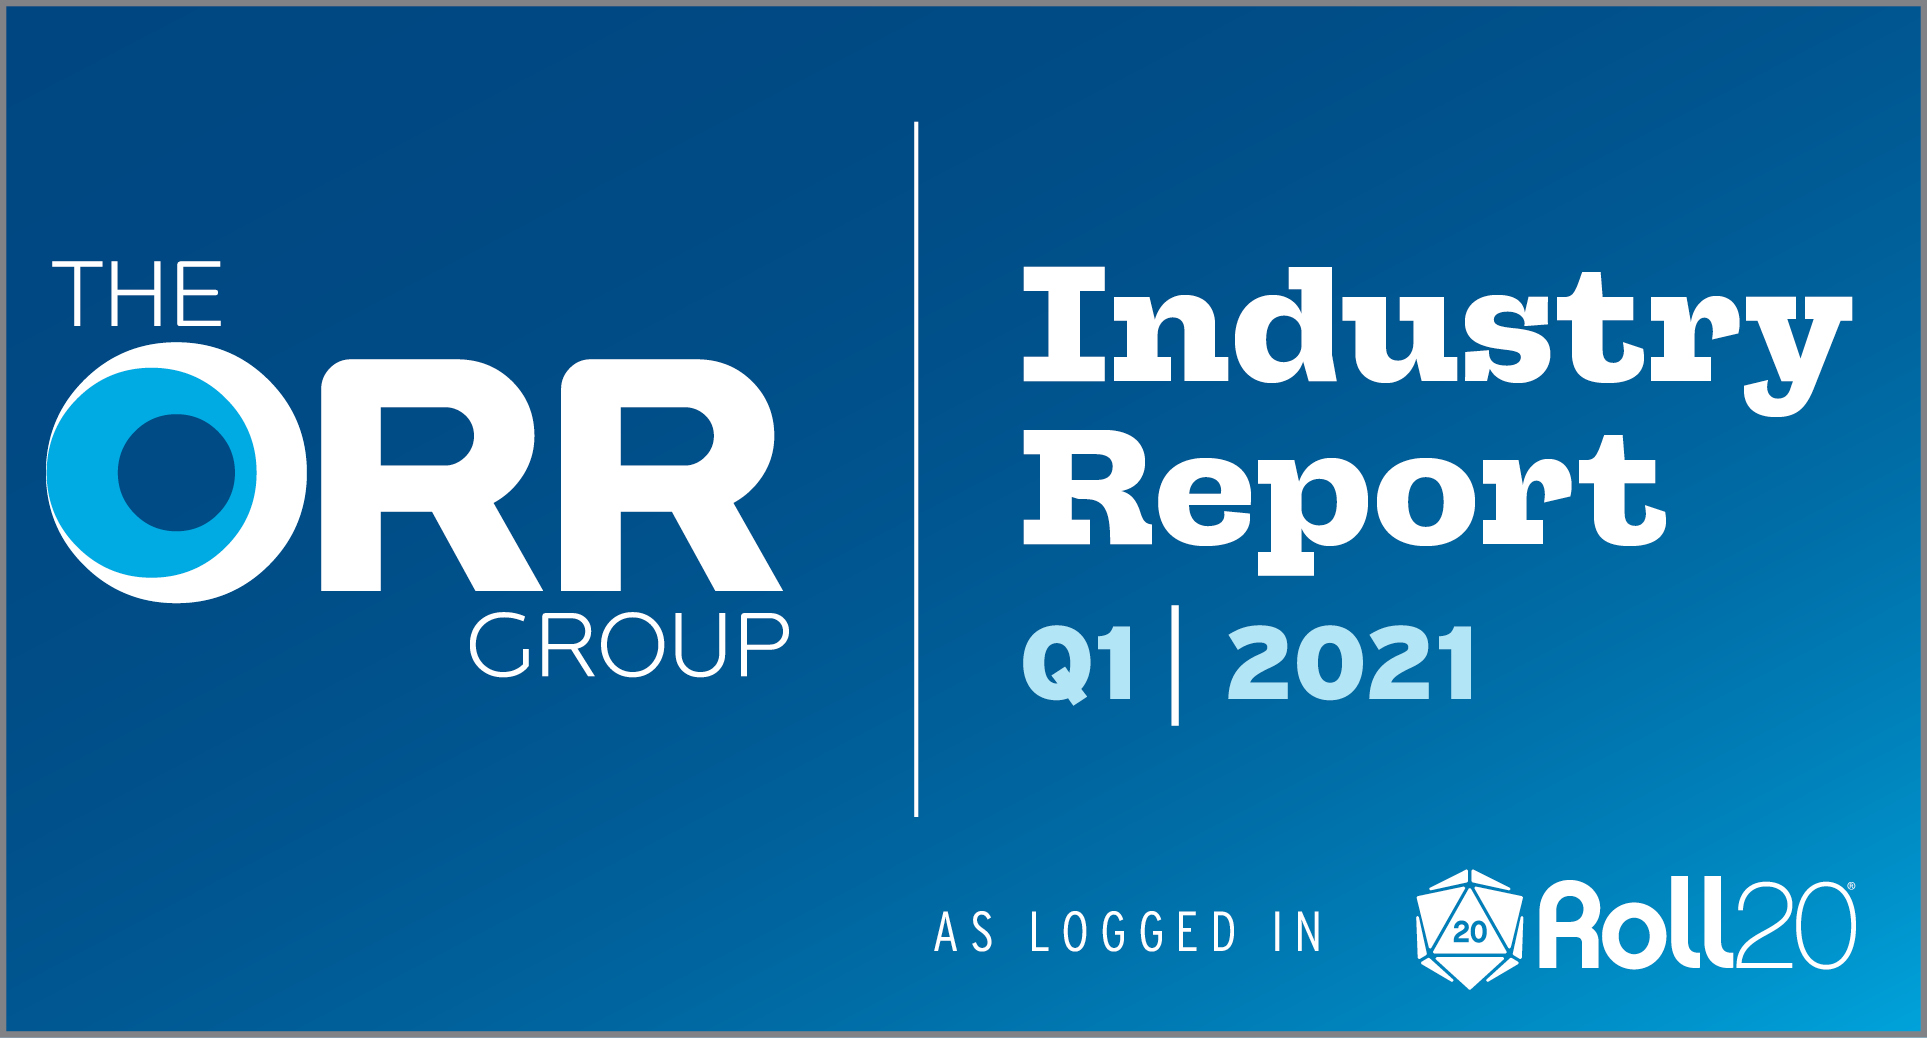 The Orr Group industry Report 2022.